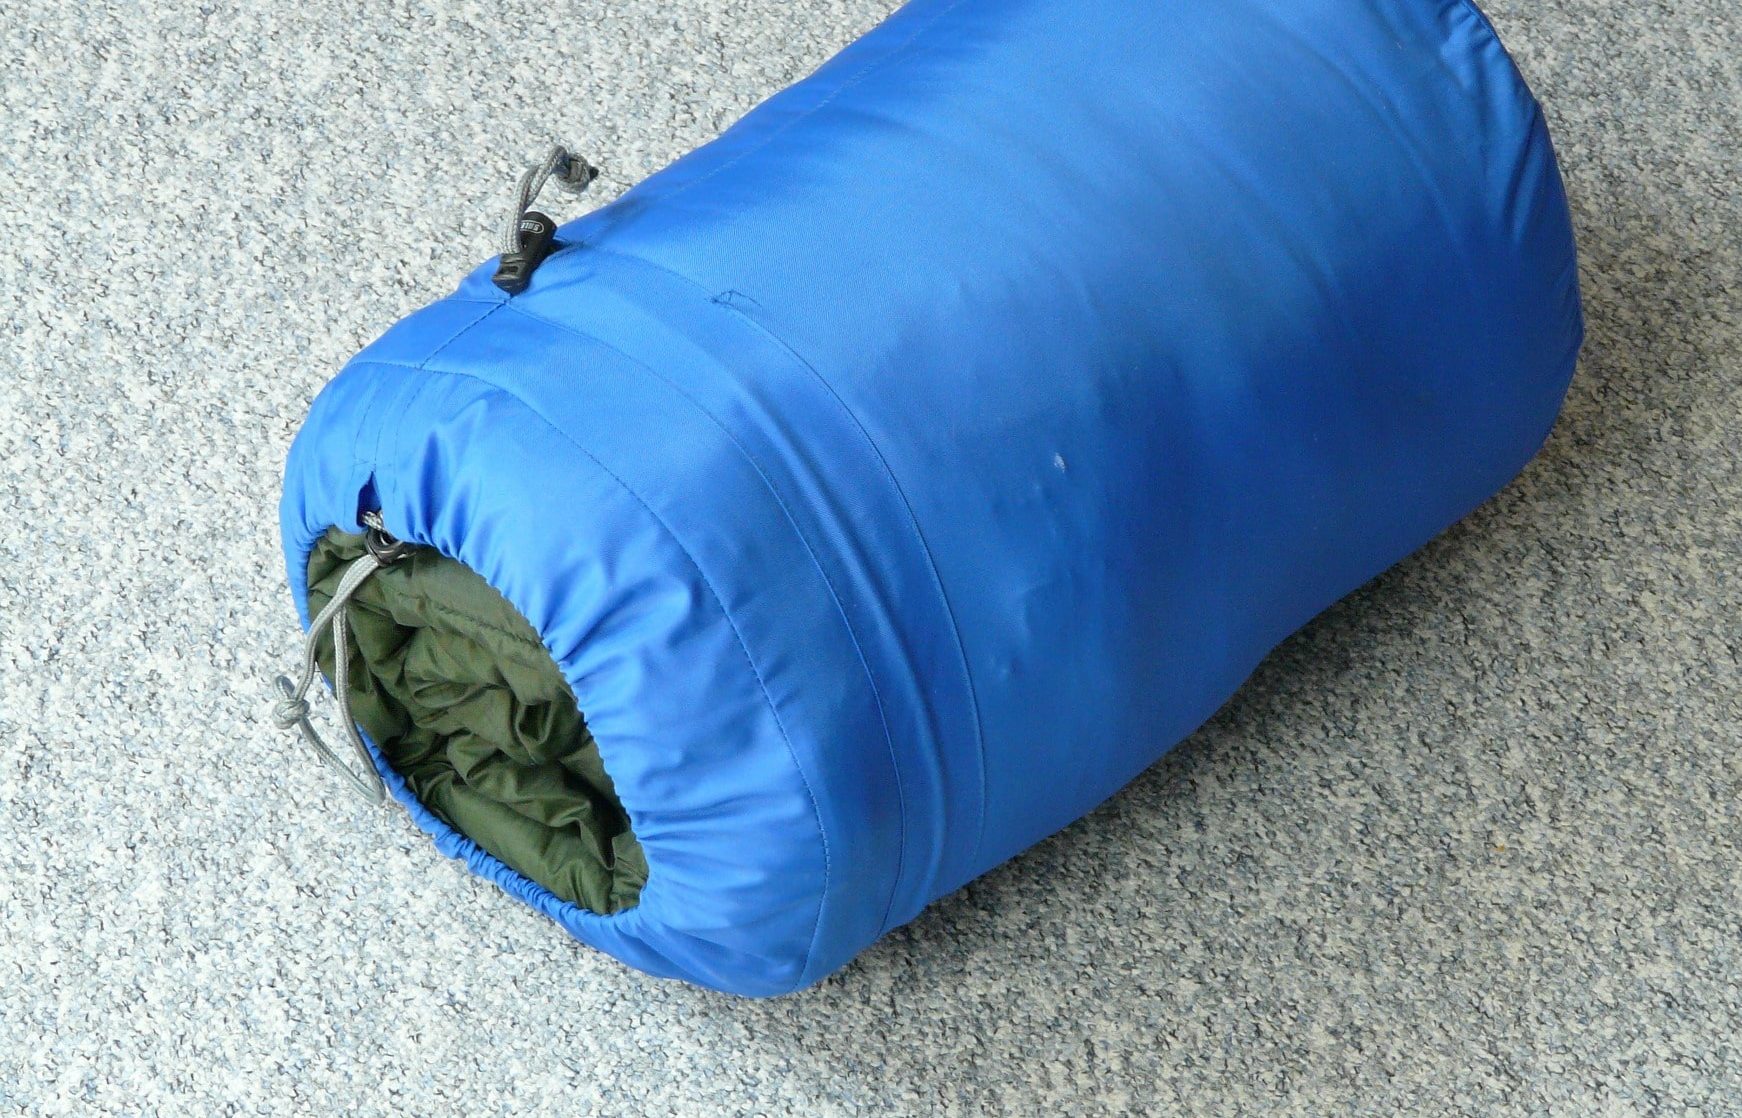 How to wash sleeping bags